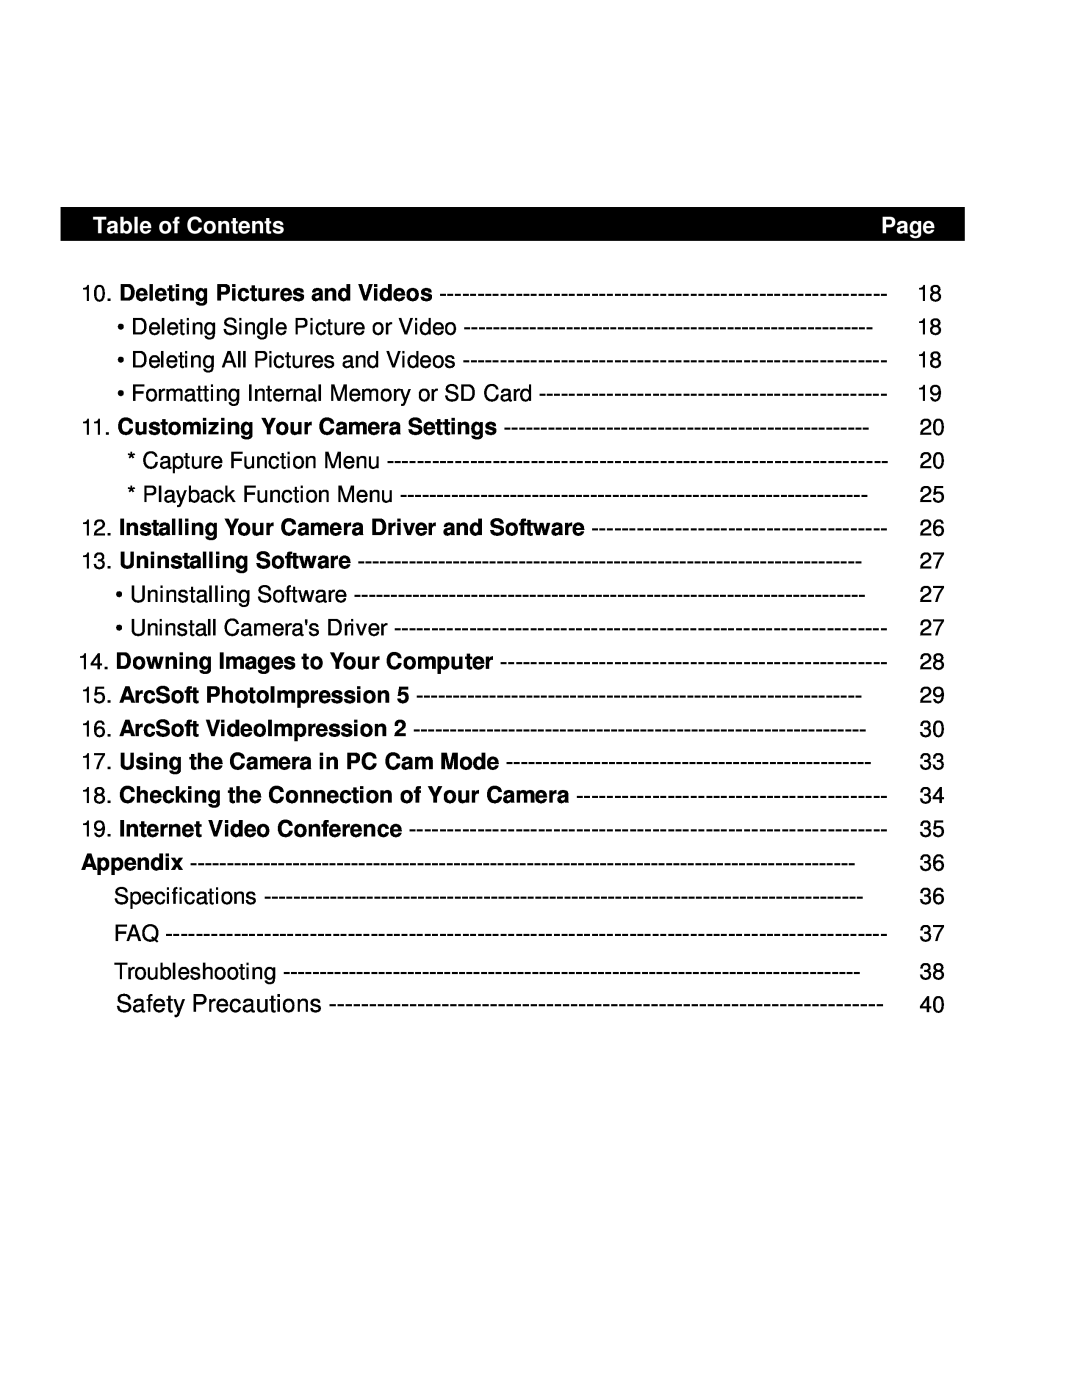 VistaQuest VQ5015 user manual Safety Precautions, Installing Your Camera Driver and Software, Table of Contents, Page 